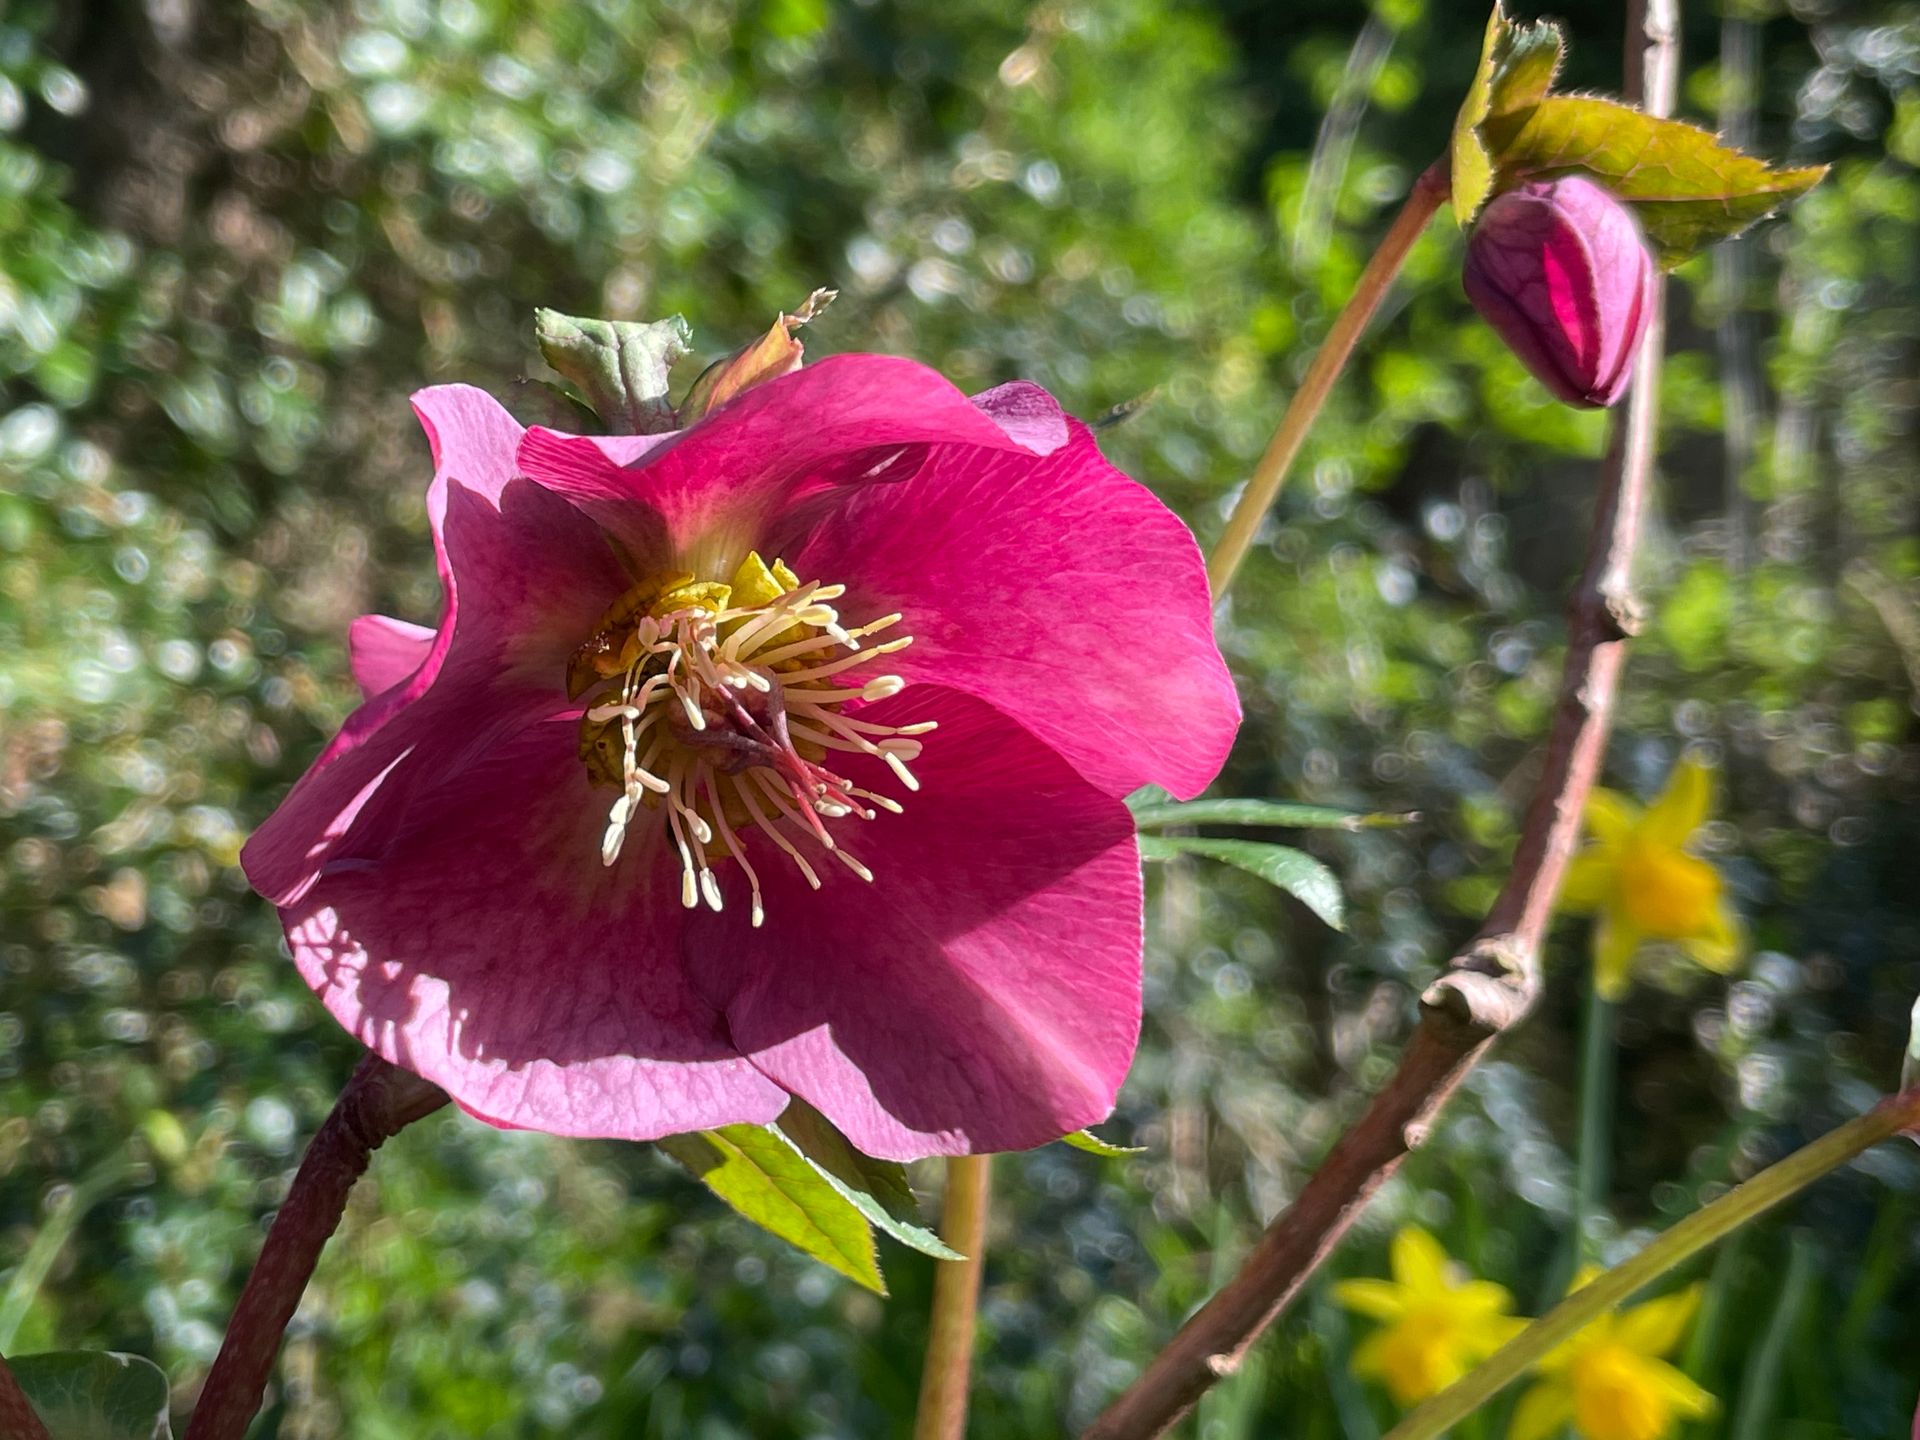 Close-up with unfocused background of a purple hellebore flower lit by bright sunshine.